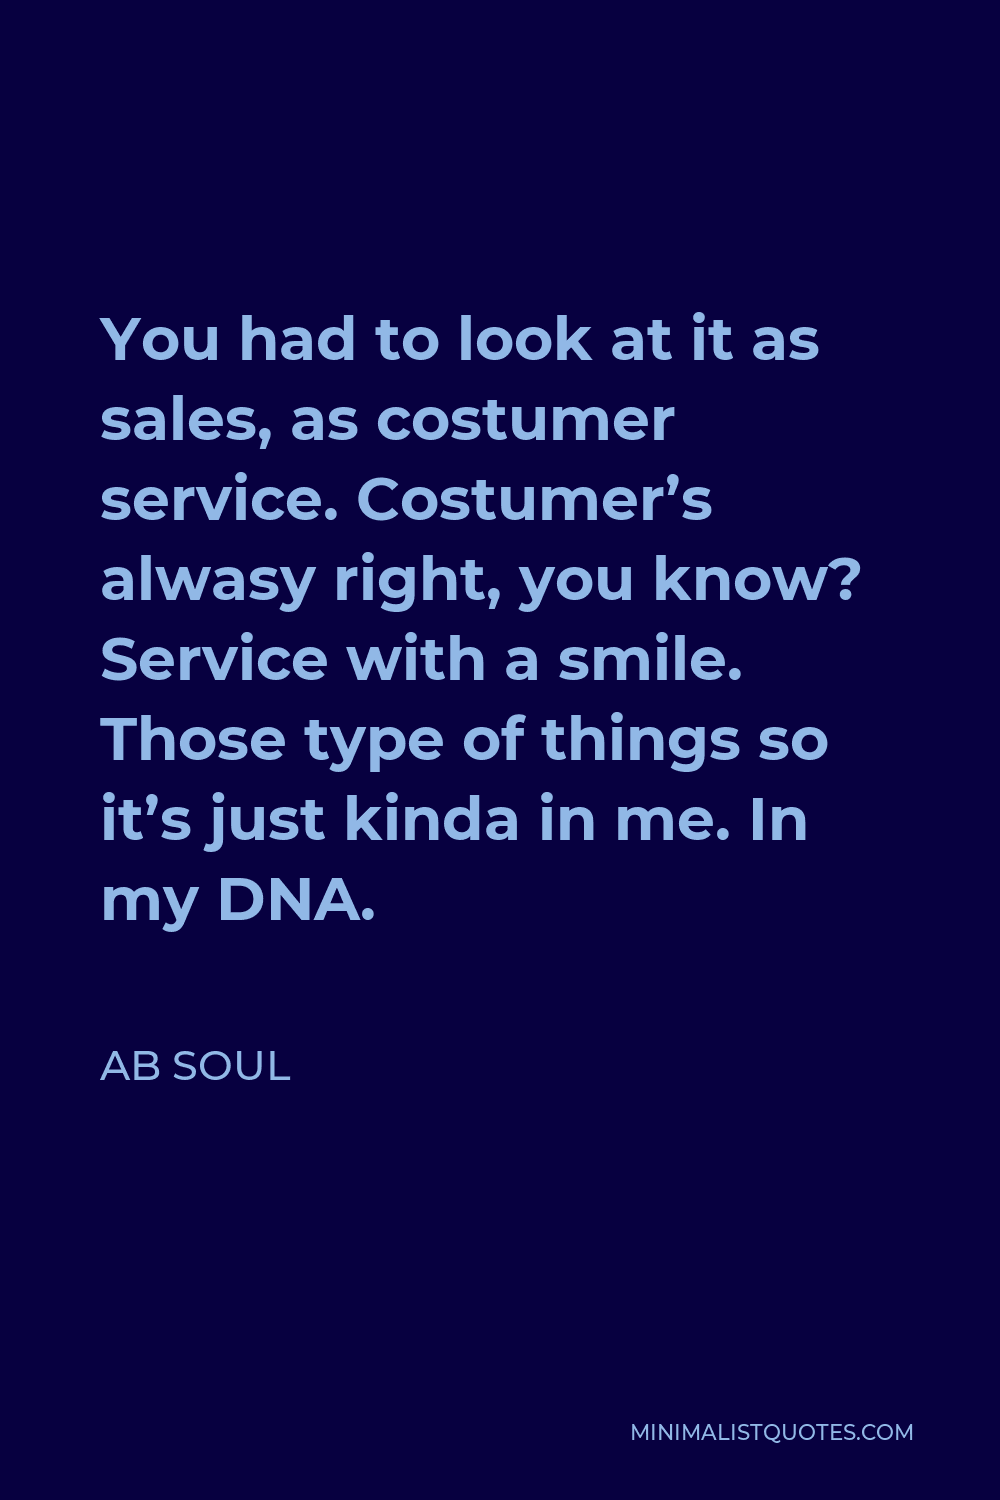 AB Soul Quote - You had to look at it as sales, as costumer service. Costumer’s alwasy right, you know? Service with a smile. Those type of things so it’s just kinda in me. In my DNA.